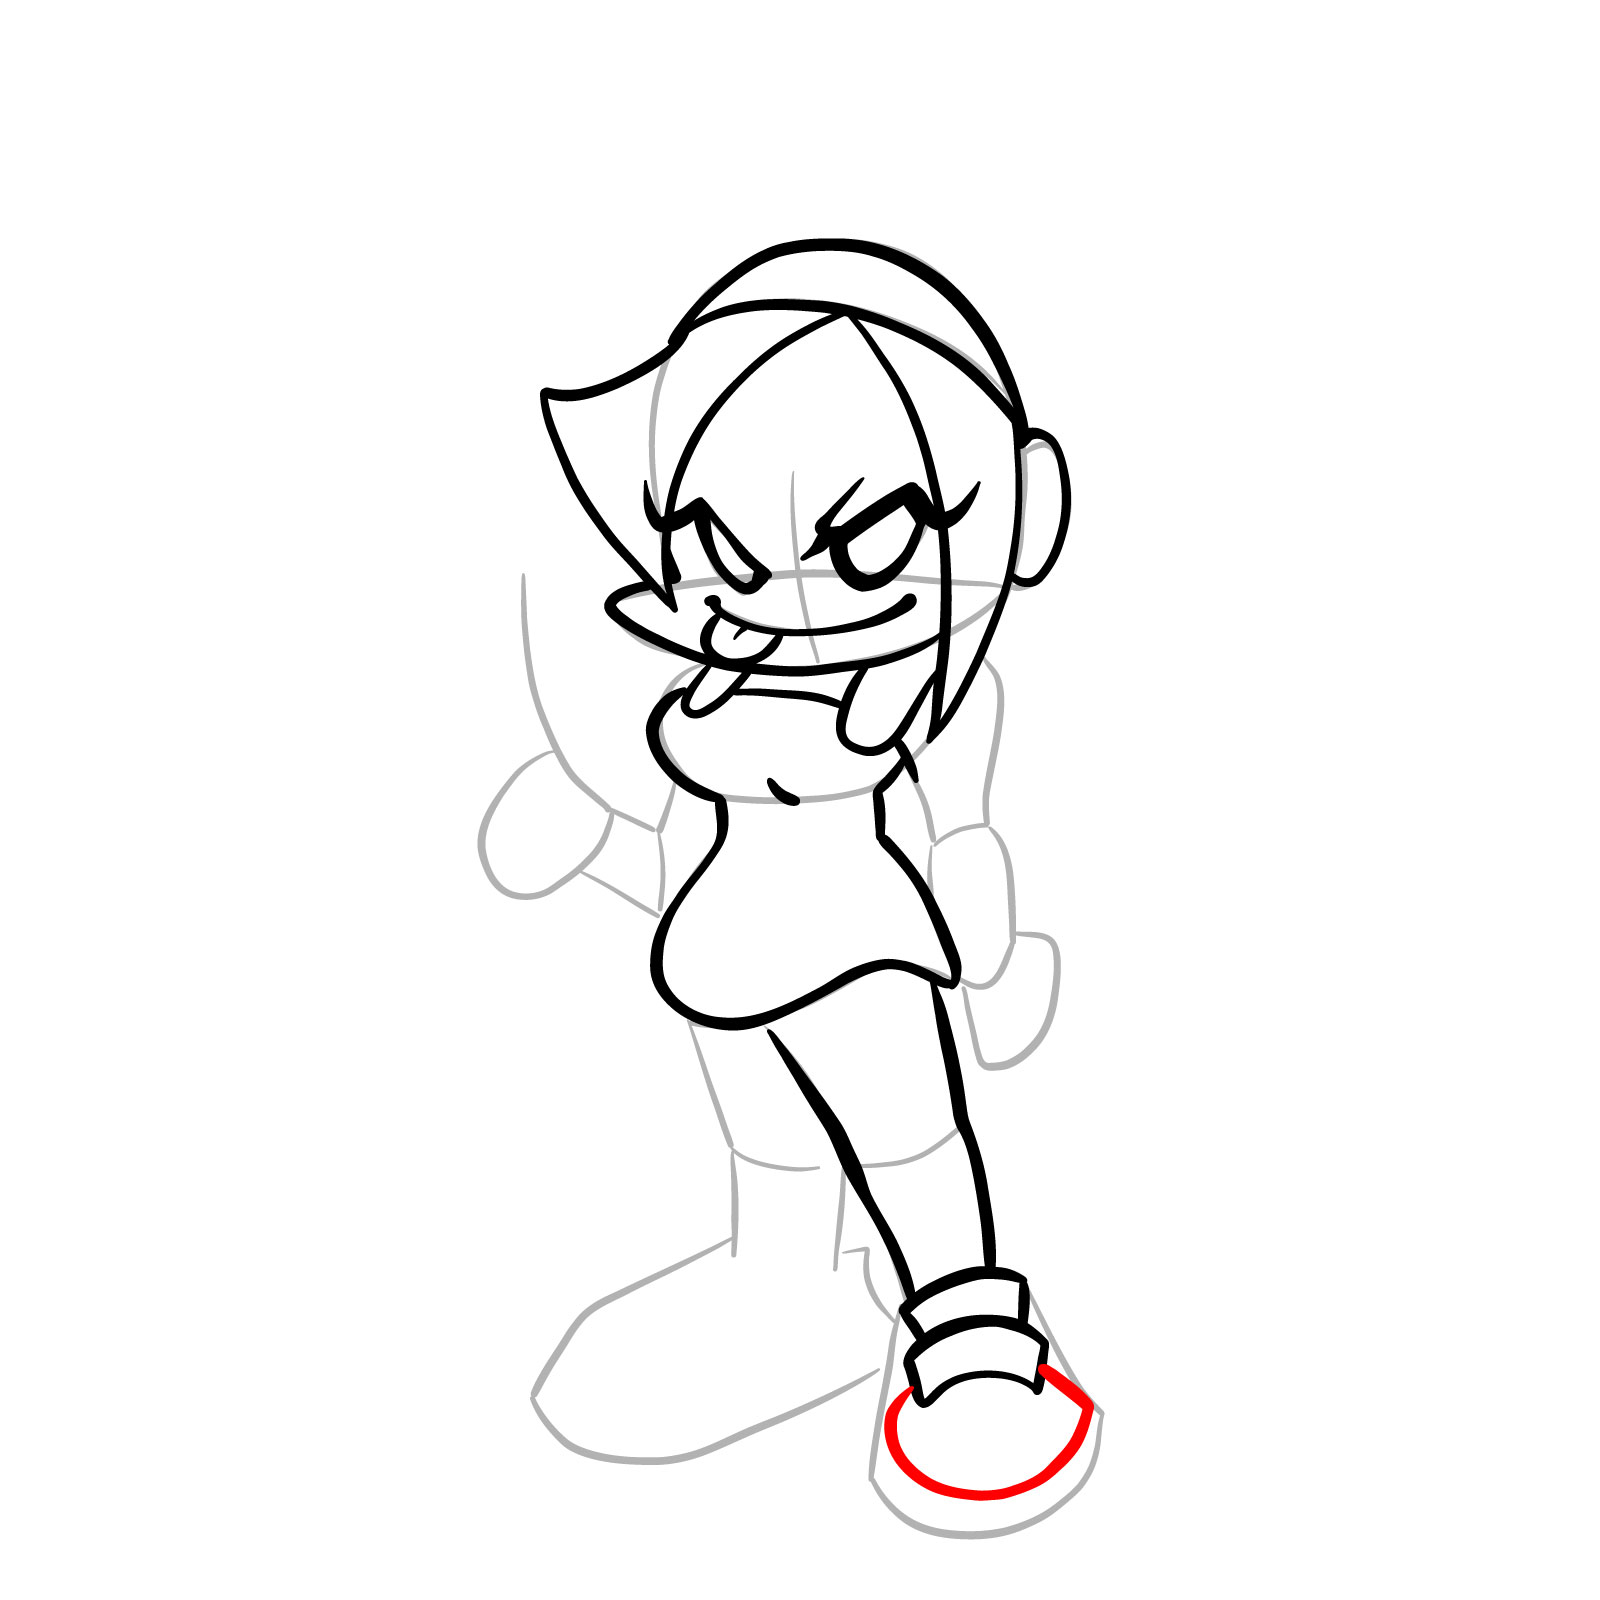 How to draw Nene from FNF - step 16